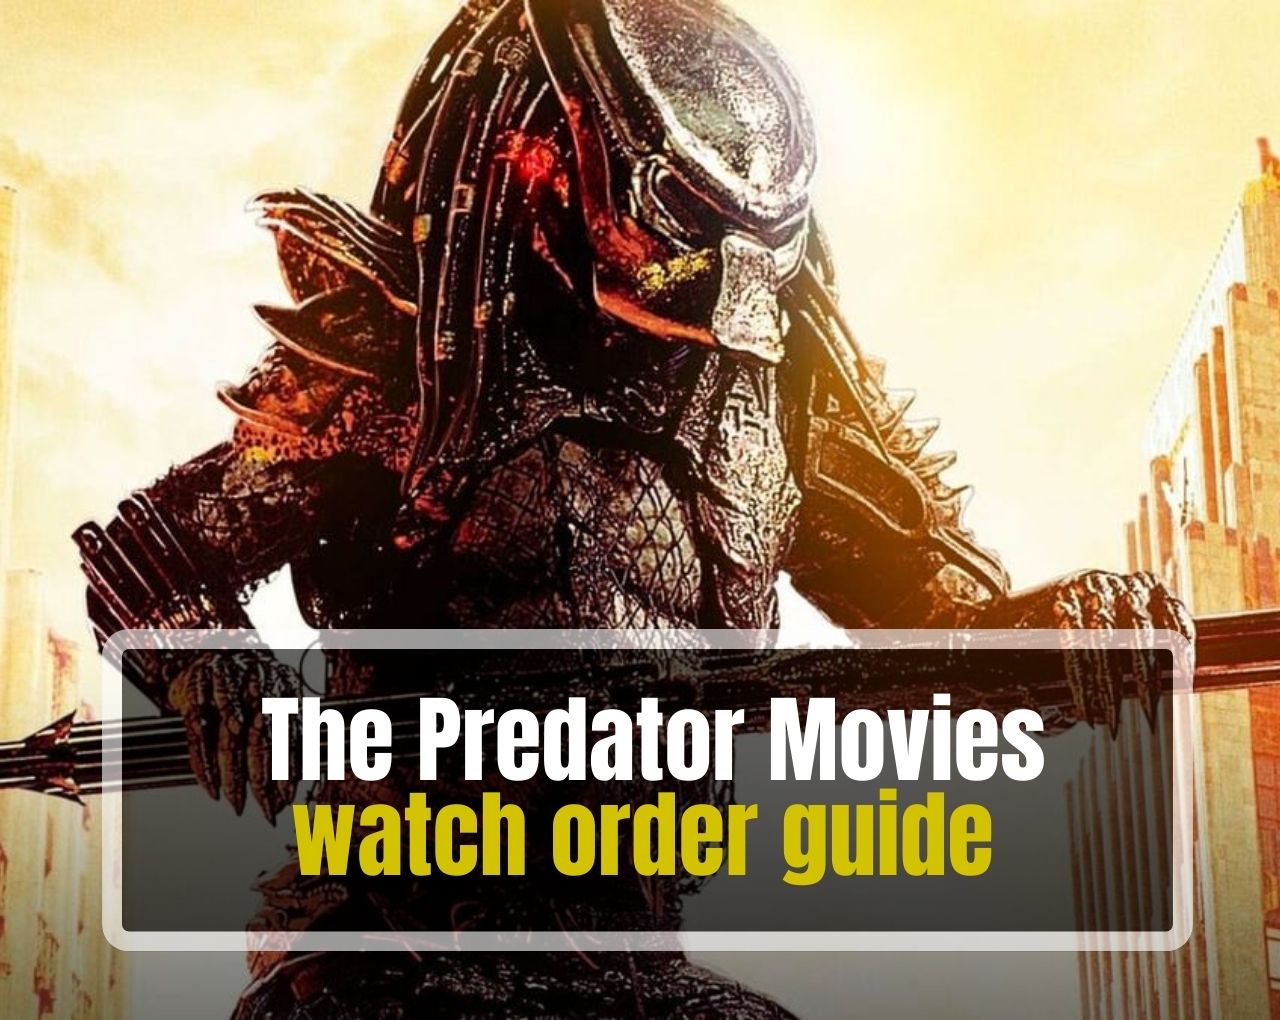 The Predator Movies Watch Order Guide